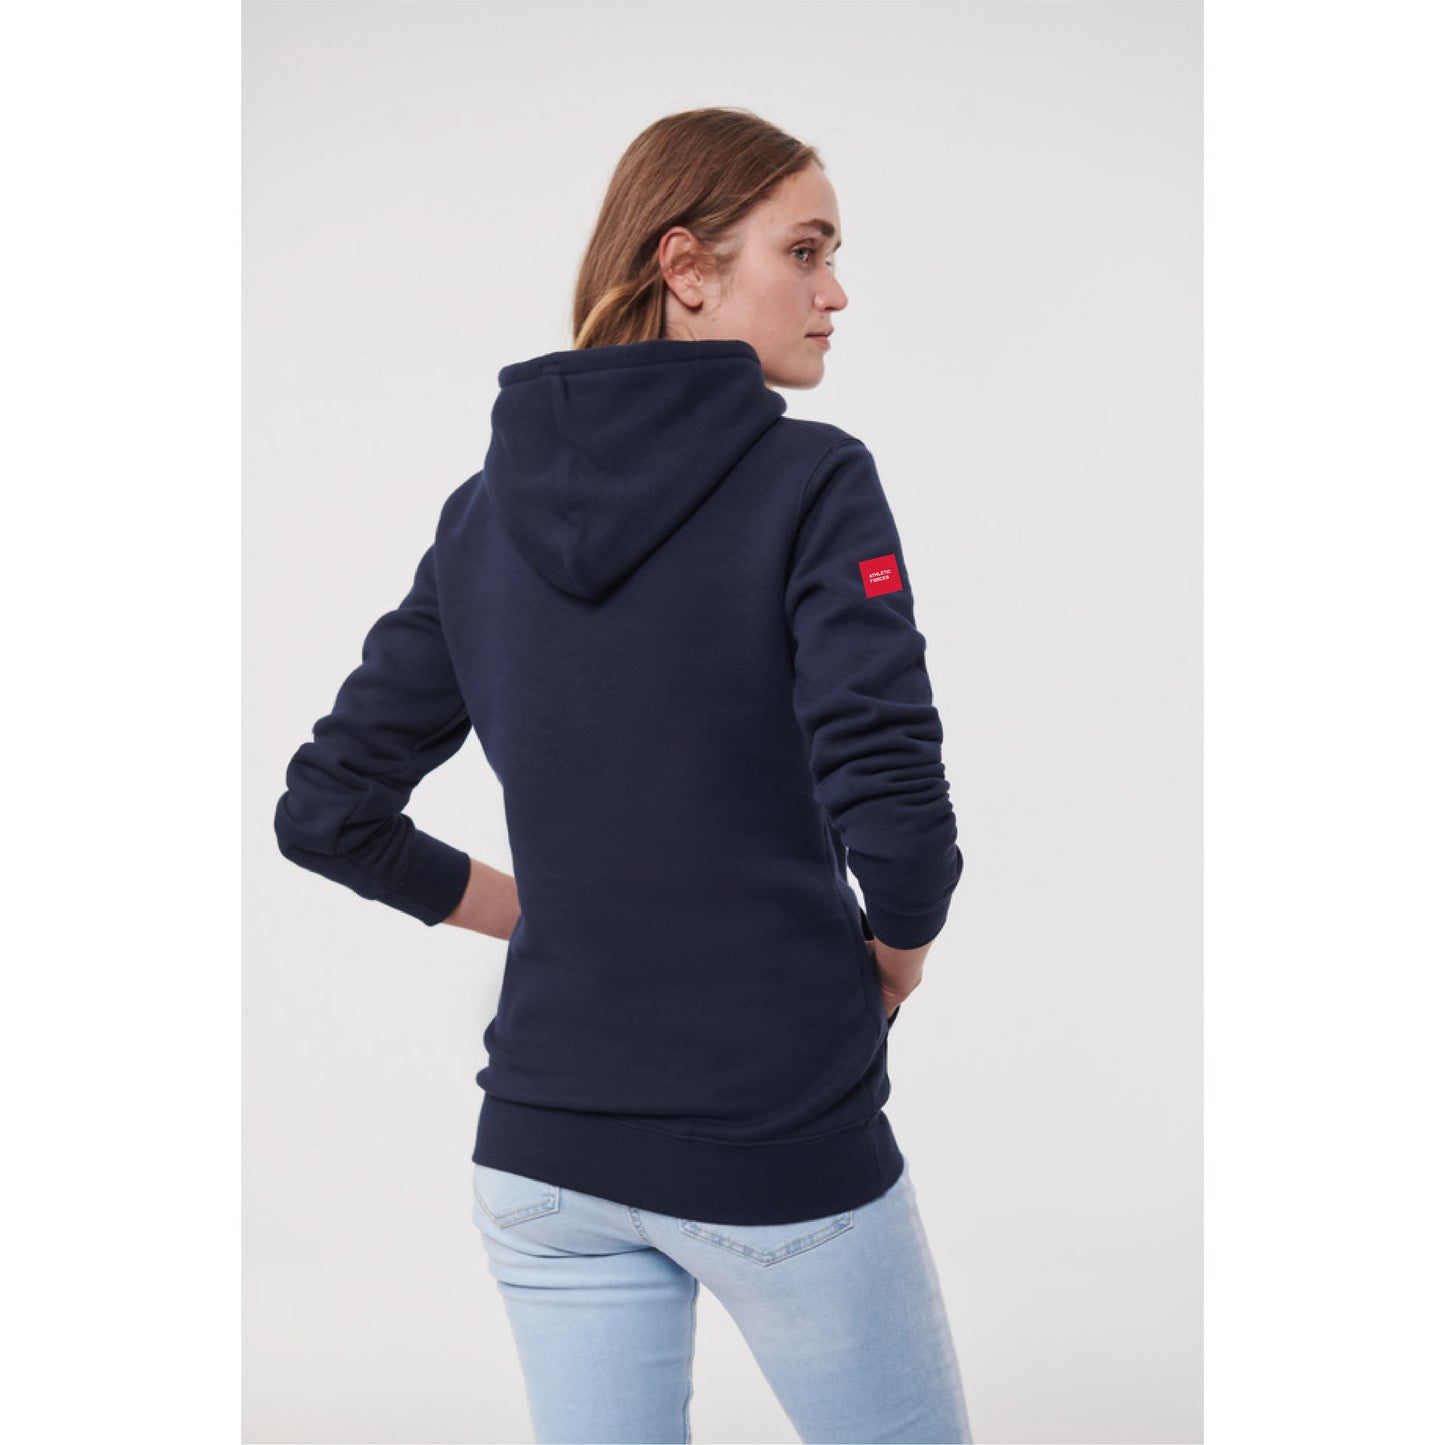 Robot Force ® Invincible Identity Hoodie